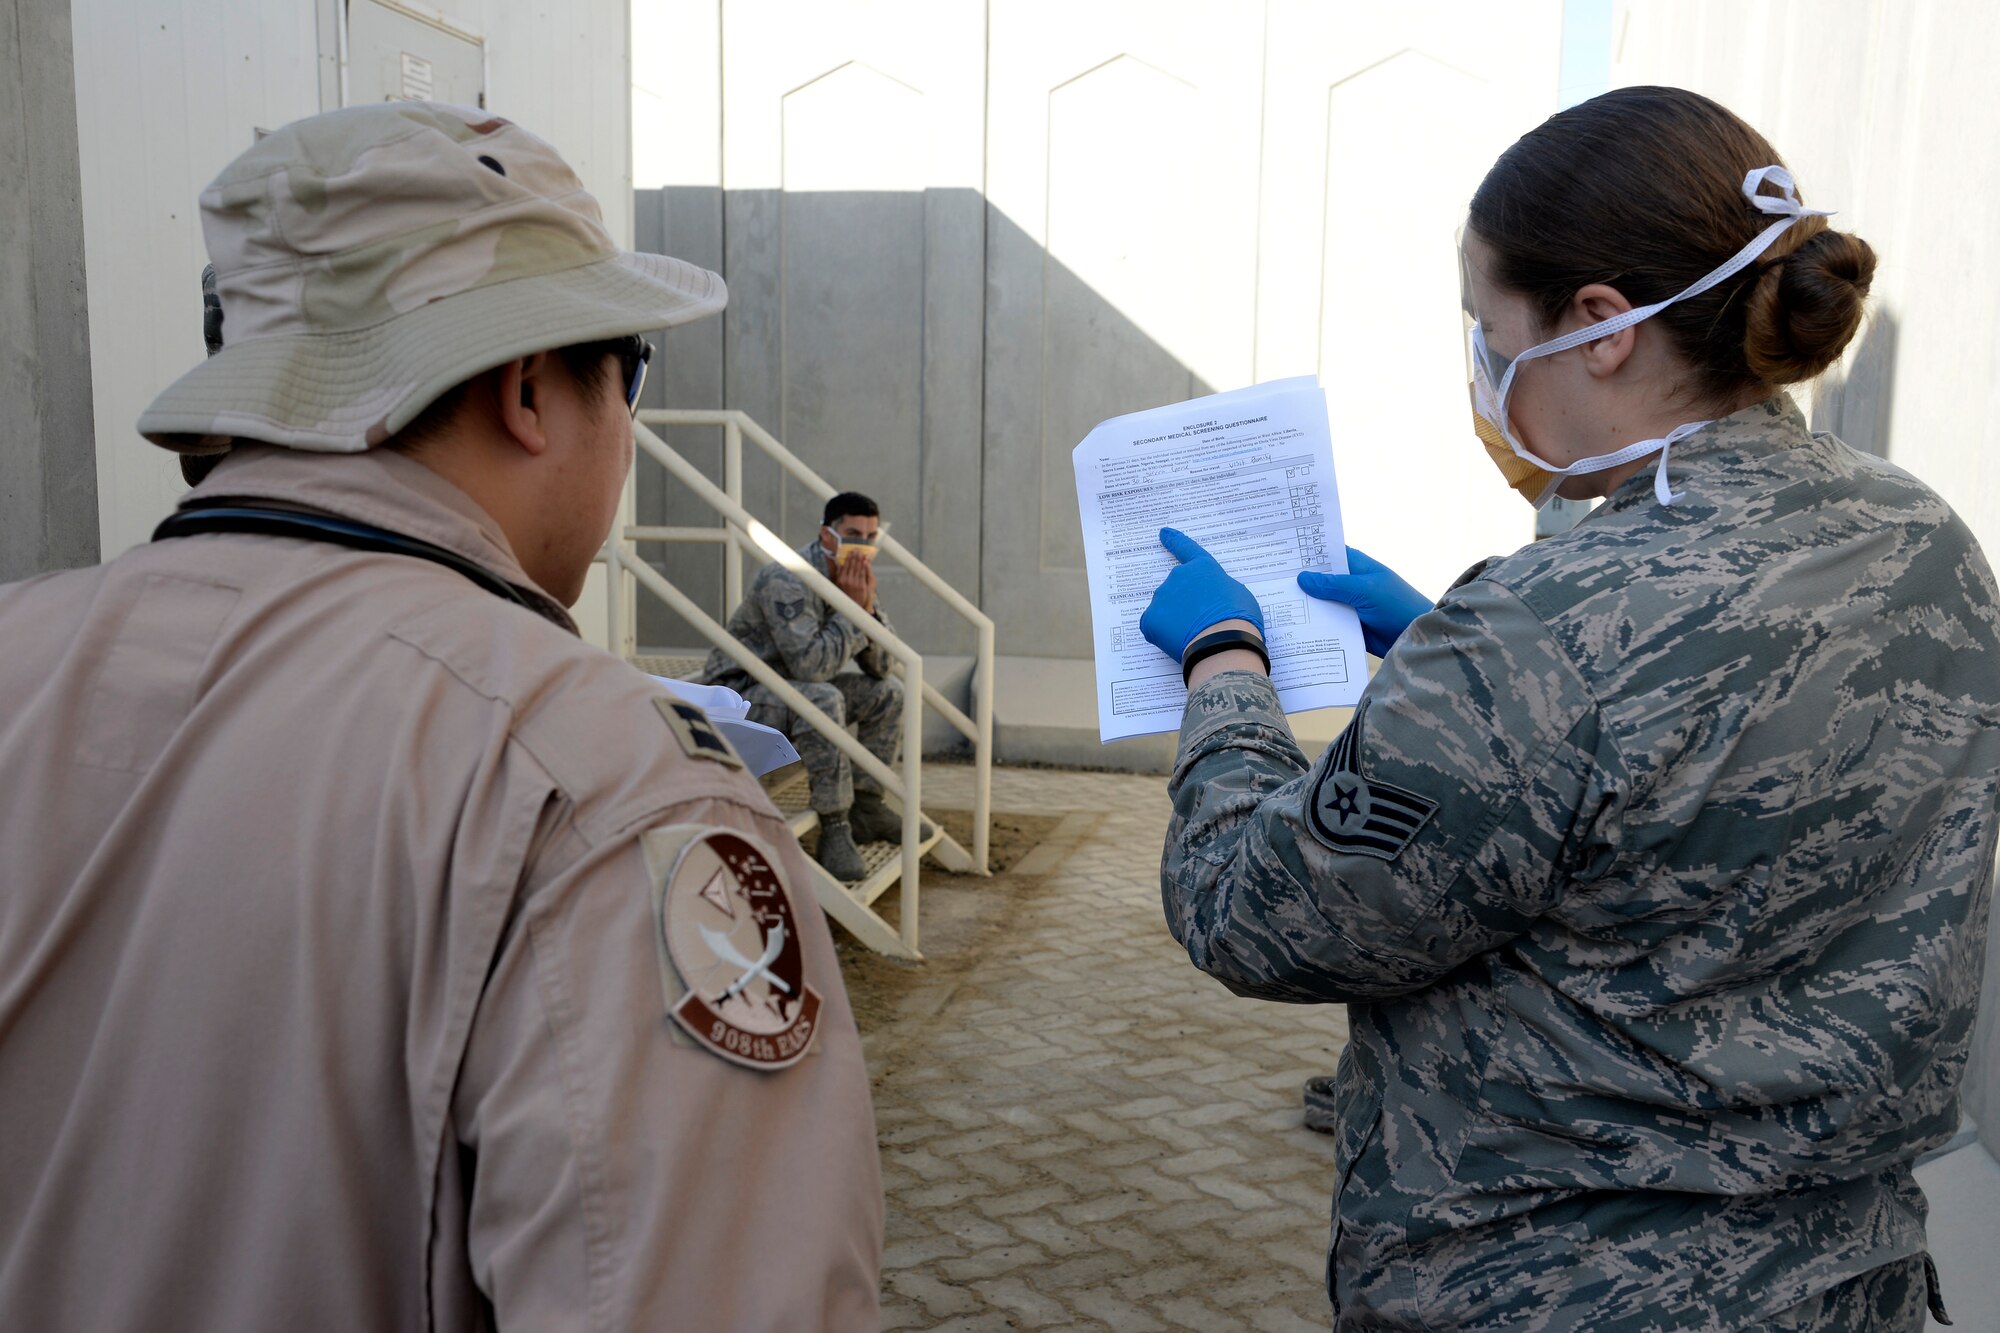 Staff Sgt. Hannah, medical technician, goes over the medical questionnaire from a simulated Ebola patient with Capt. Son Pham during a training exercise at an undisclosed location in Southwest Asia Jan. 15, 2015. Members of the Expeditionary Medical Group, Expeditionary Force Support Squadron, Expeditionary Civil Engineer Squadron and Expeditionary Security Forces Squadron took part in the exercise. Hannah is currently deployed from Joint Base Langley-Eustis, Va., and is a native of Lake Forest, Calif. (U.S. Air Force photo/Tech. Sgt. Marie Brown)